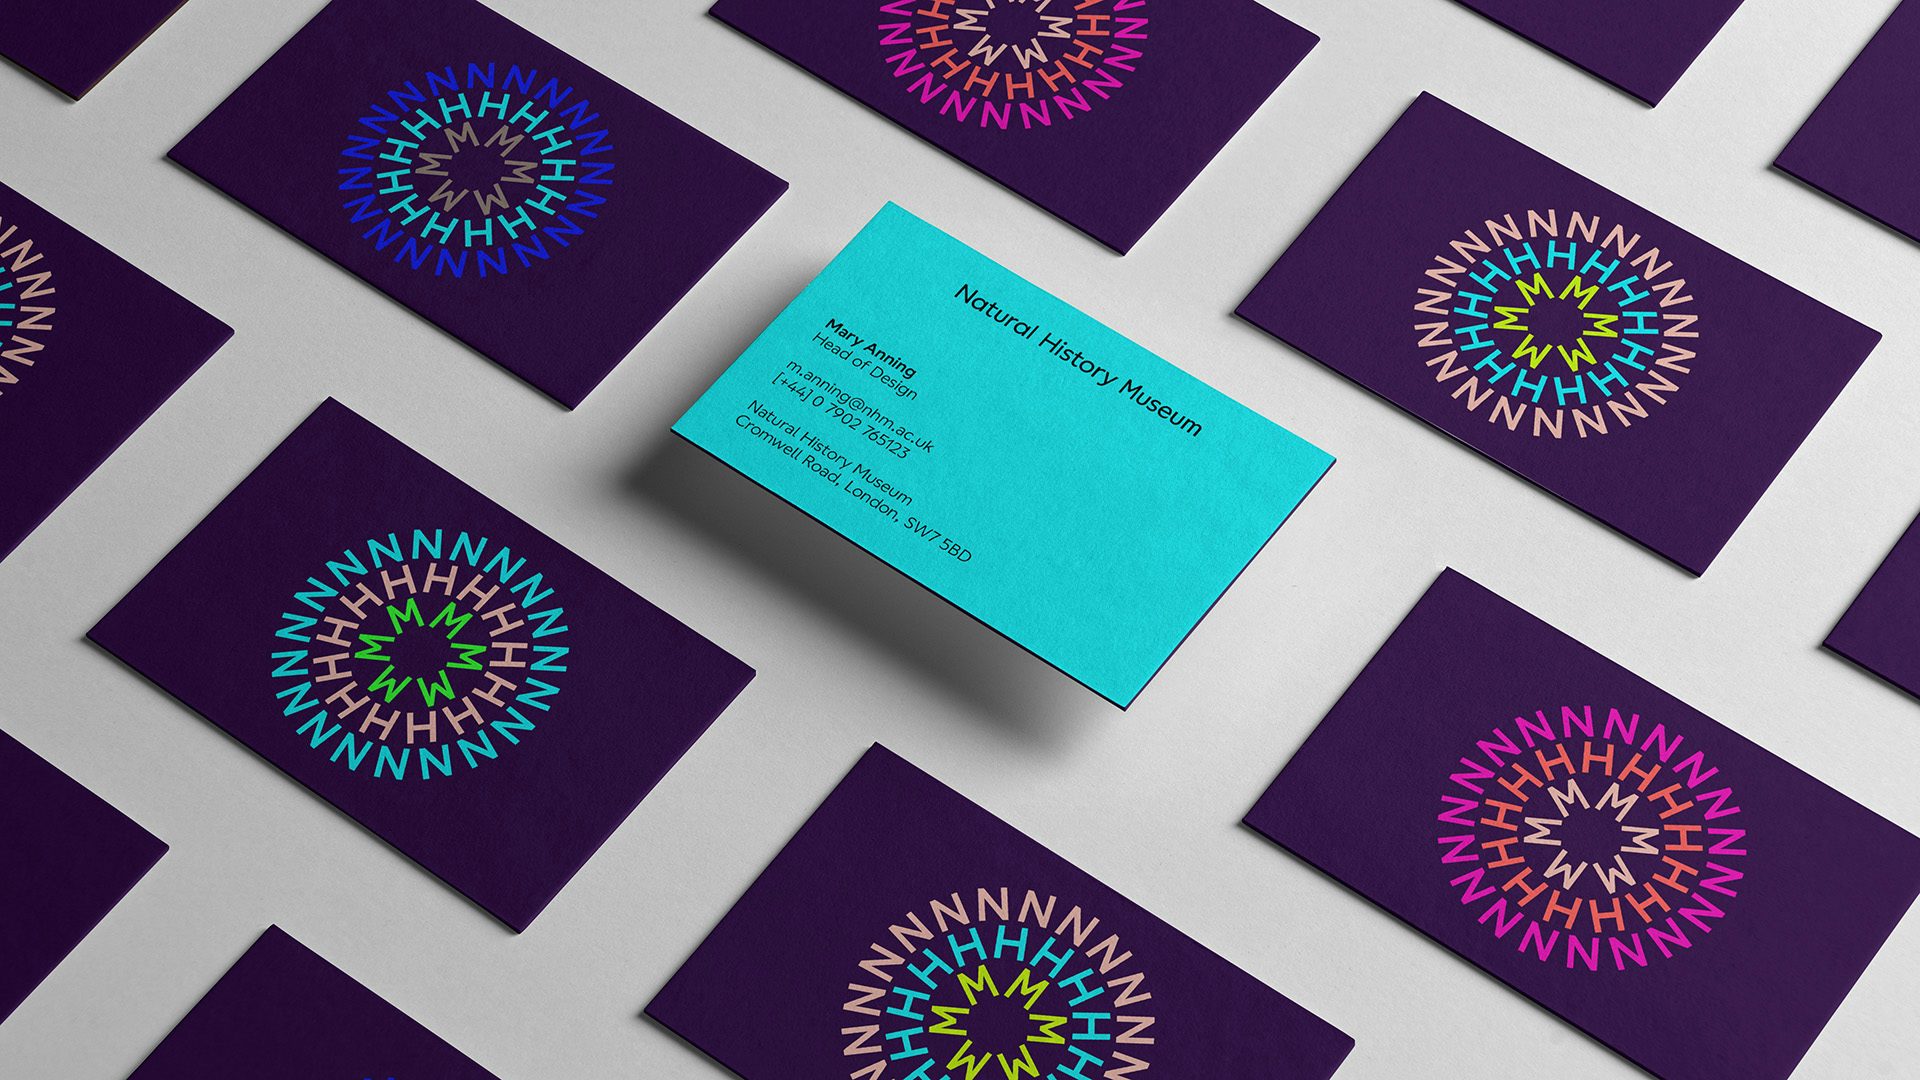 Image shows the new Natural History Museum branding on rows of purple business cards with the initials 'NHM' arranged in concentric circles, with one business card turned upside down to reveal a bright blue reverse side